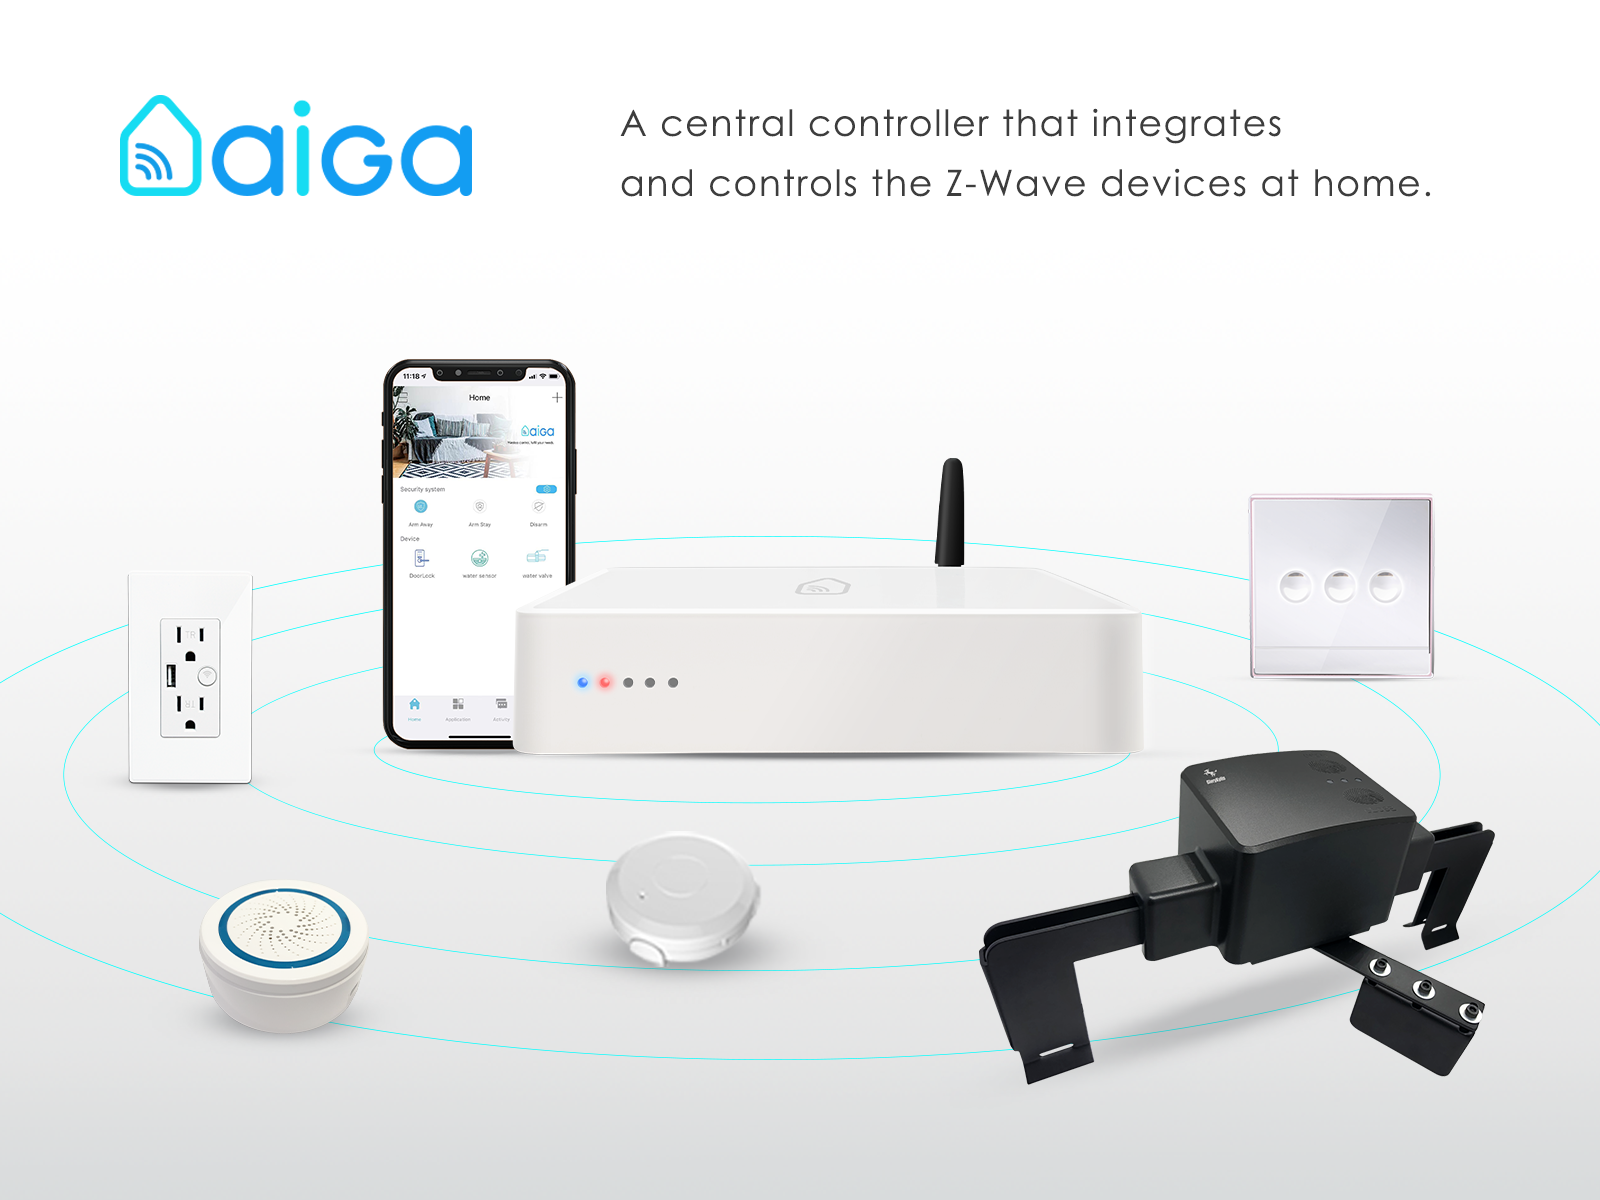 Your smart housekeeper- Aiga Smart gateway ( Z-wave)
1. Set different mode for home automation

2. Collocate with Aiga Smart APP

3. Voice control with alexa & google home
